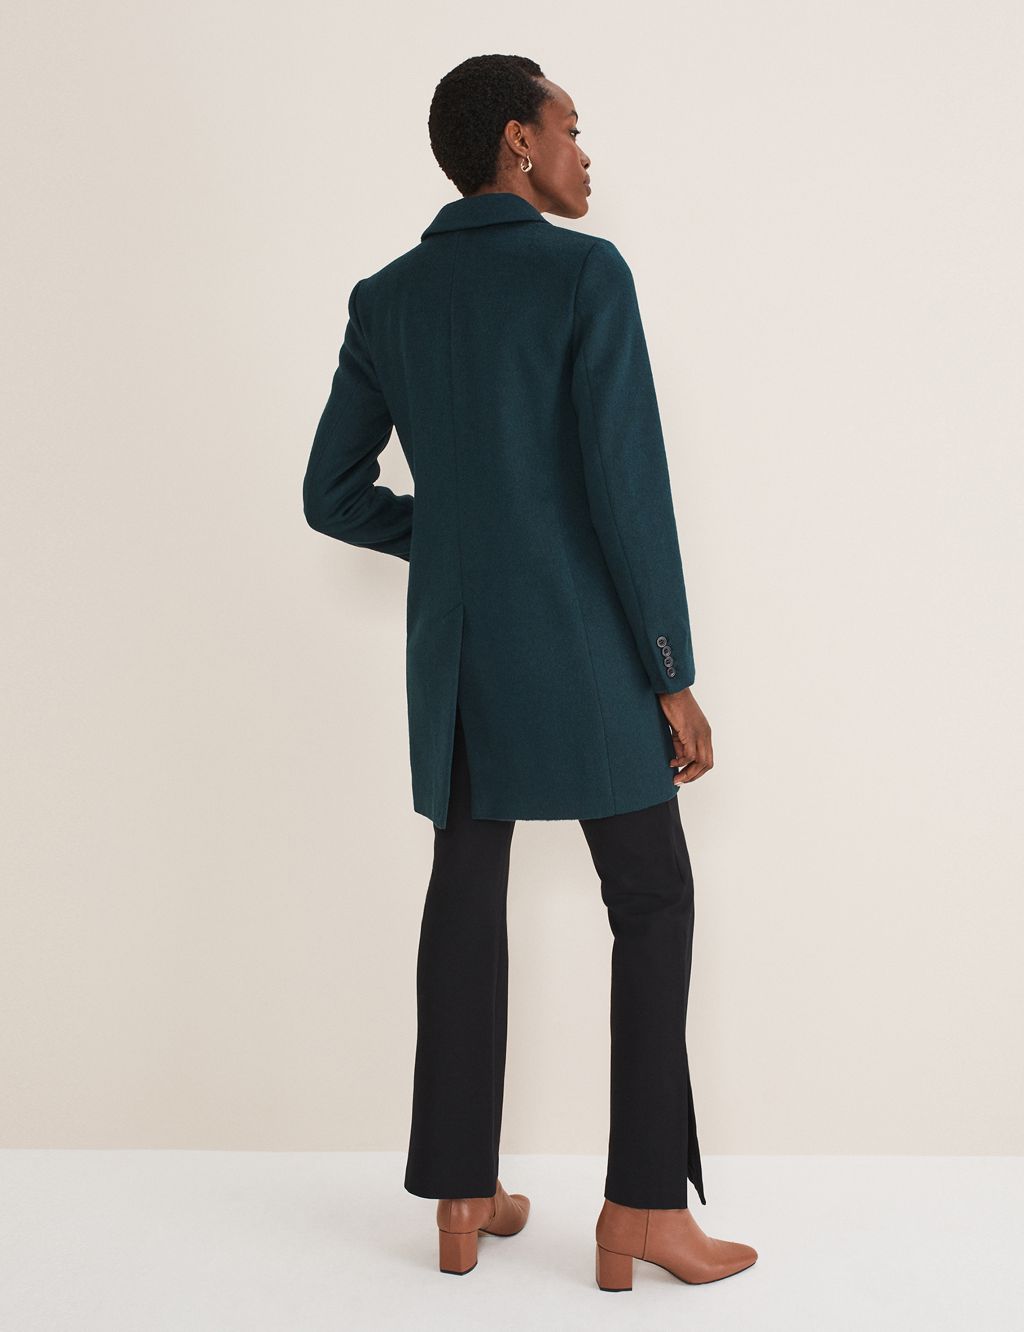 Wool Blend Collared Tailored Coat image 4